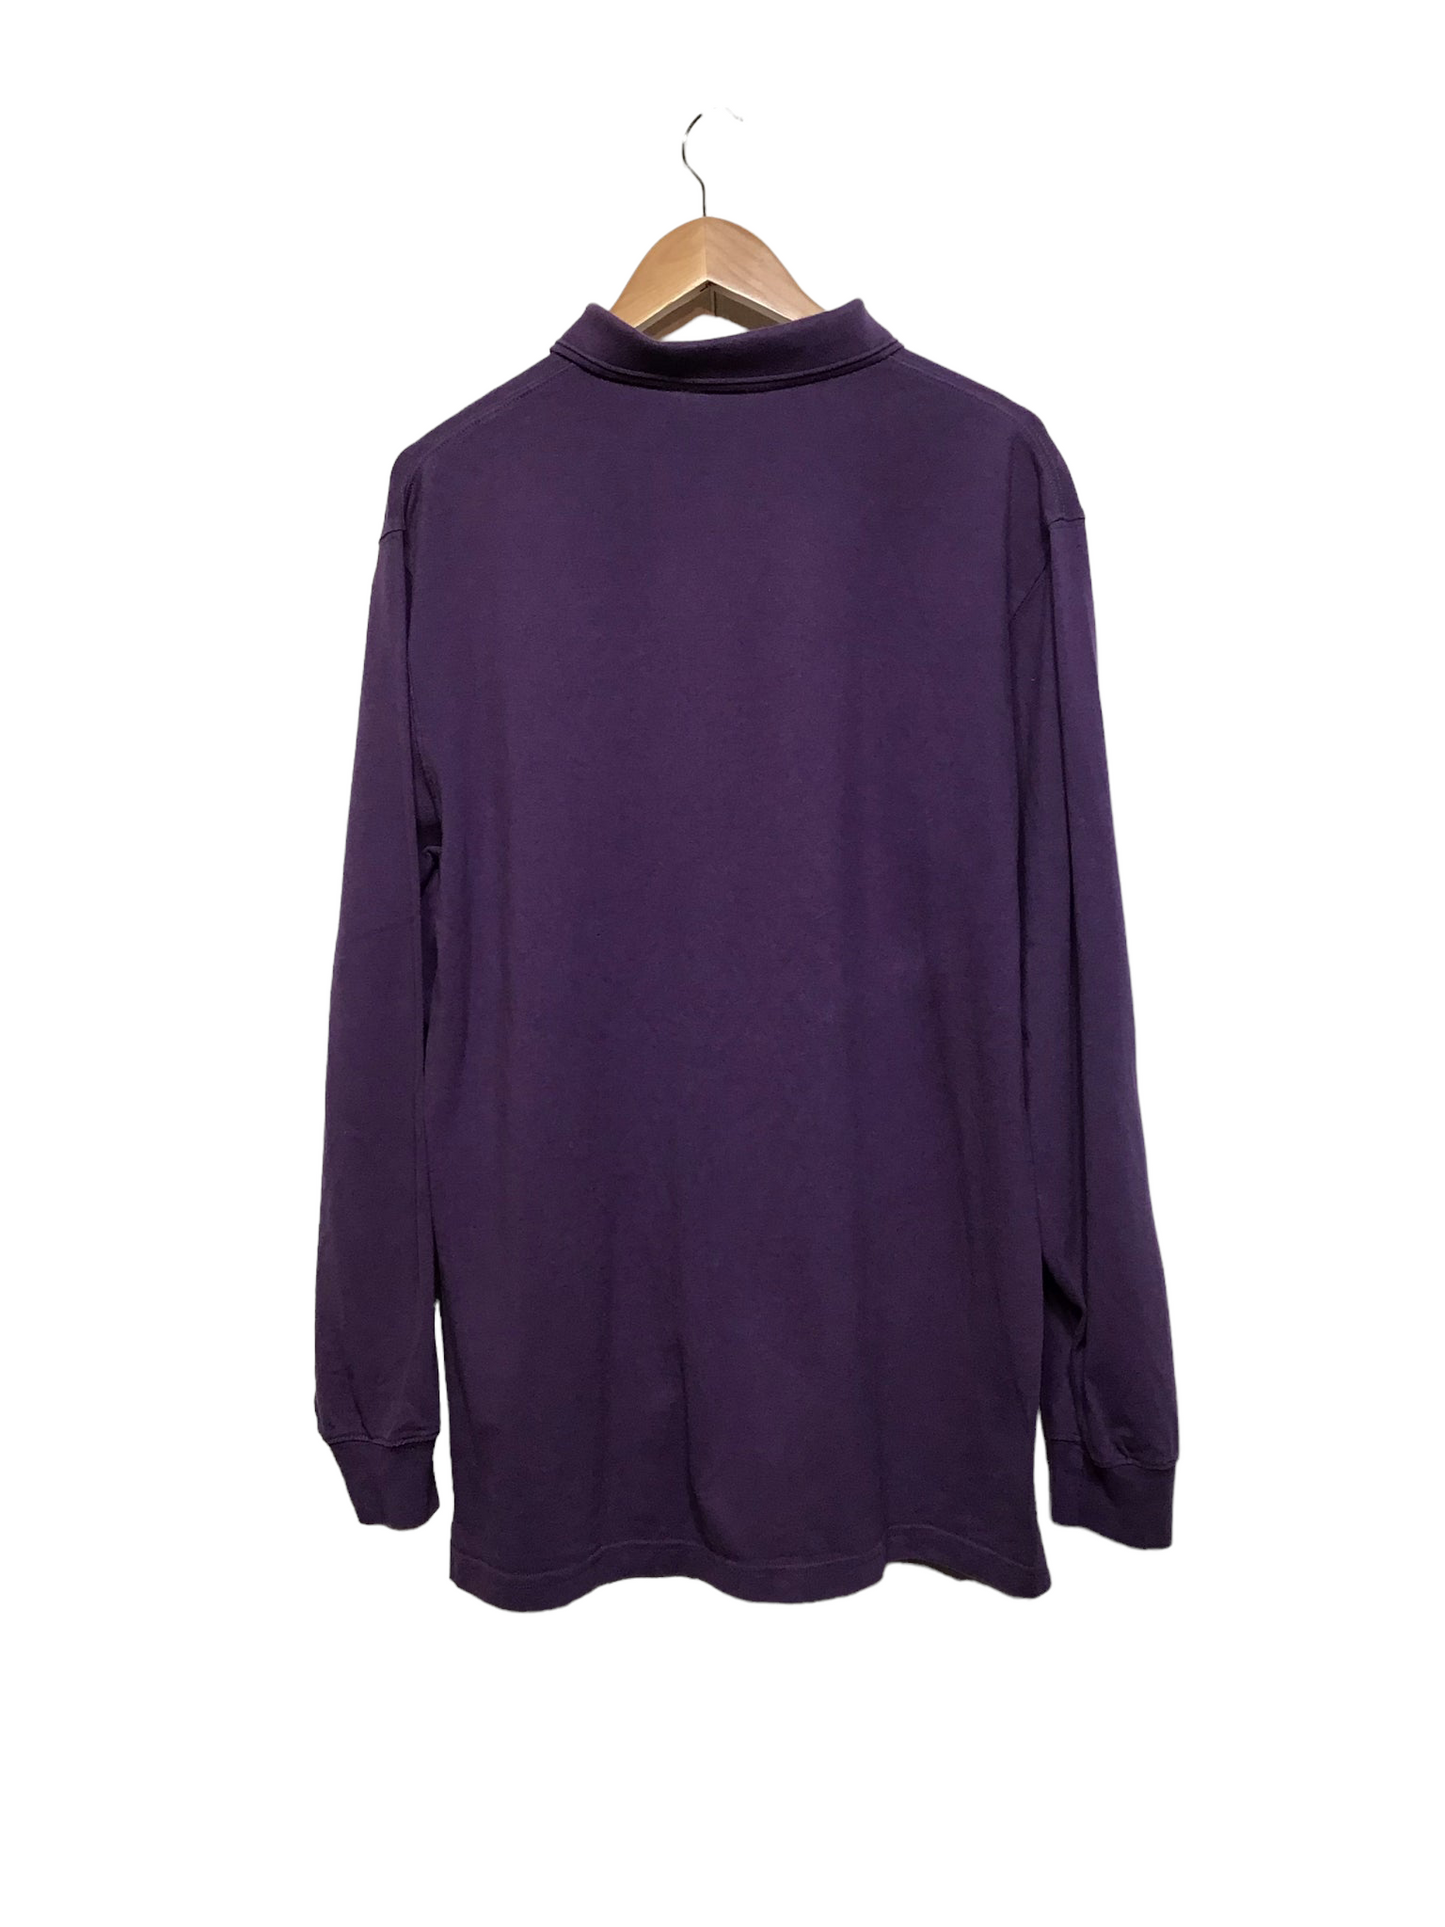 Cotton Traders Purple Long Sleeve Top (Size L)